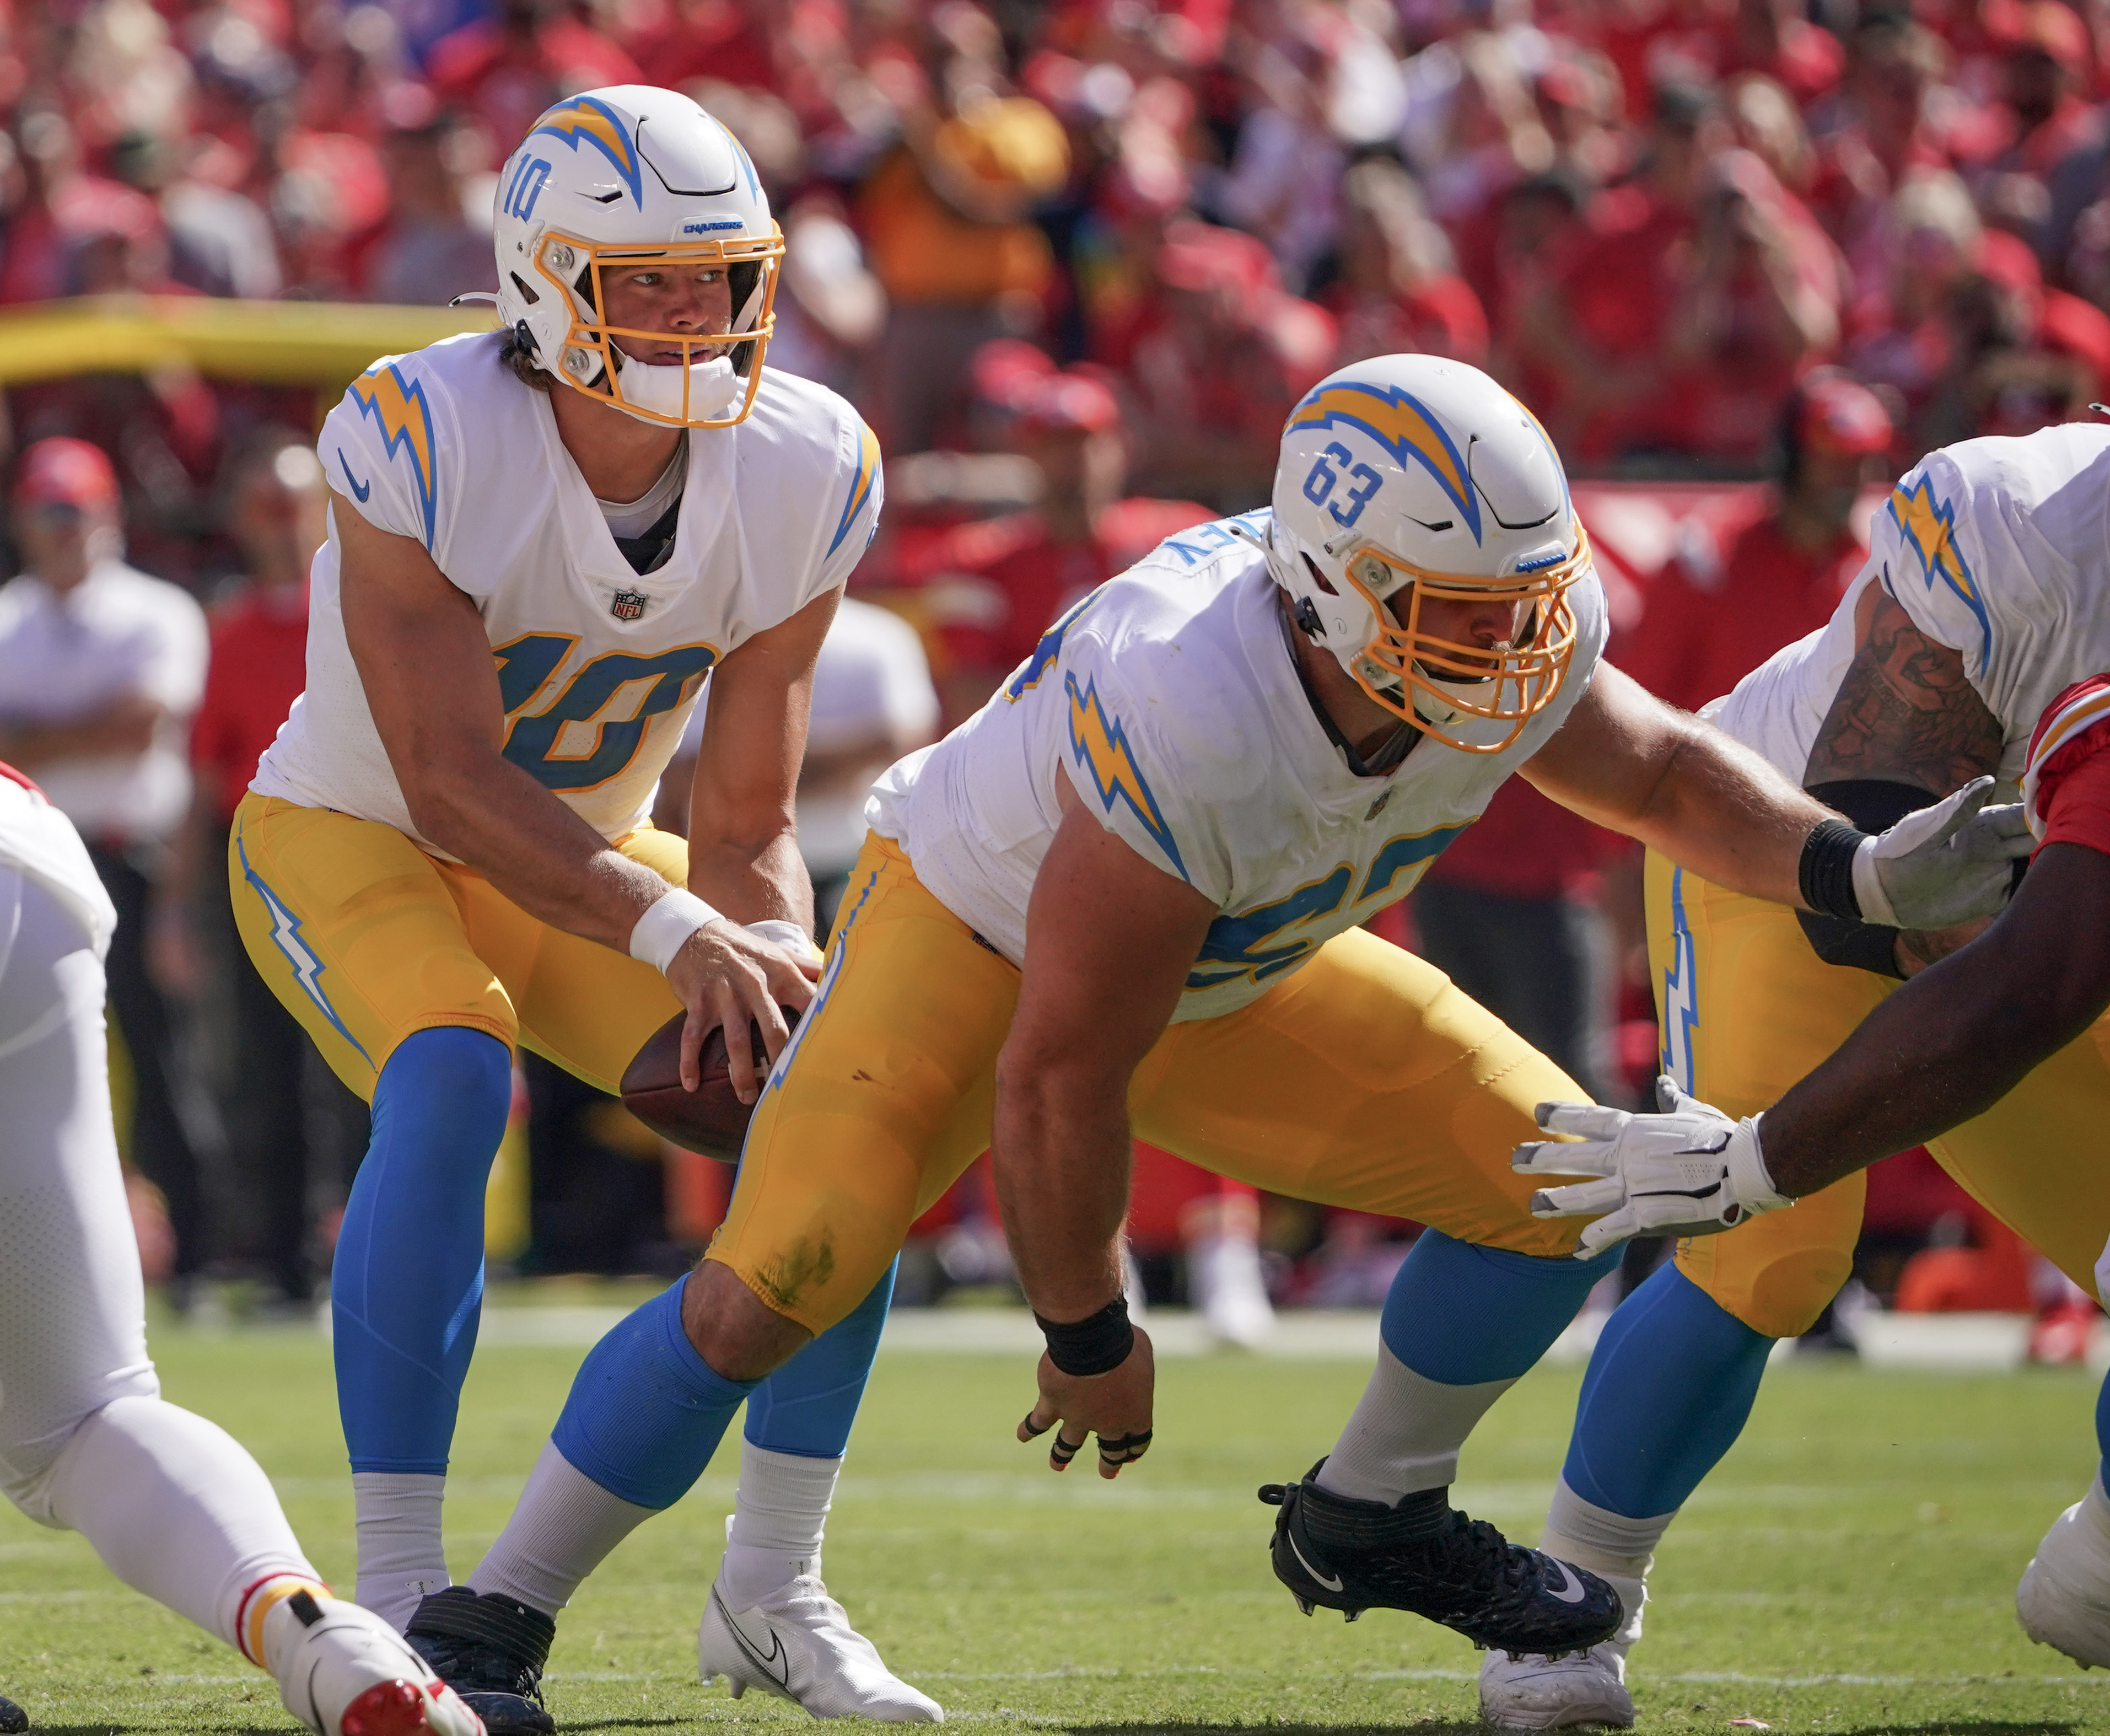 NFL: Los Angeles Chargers at Kansas City Chiefs